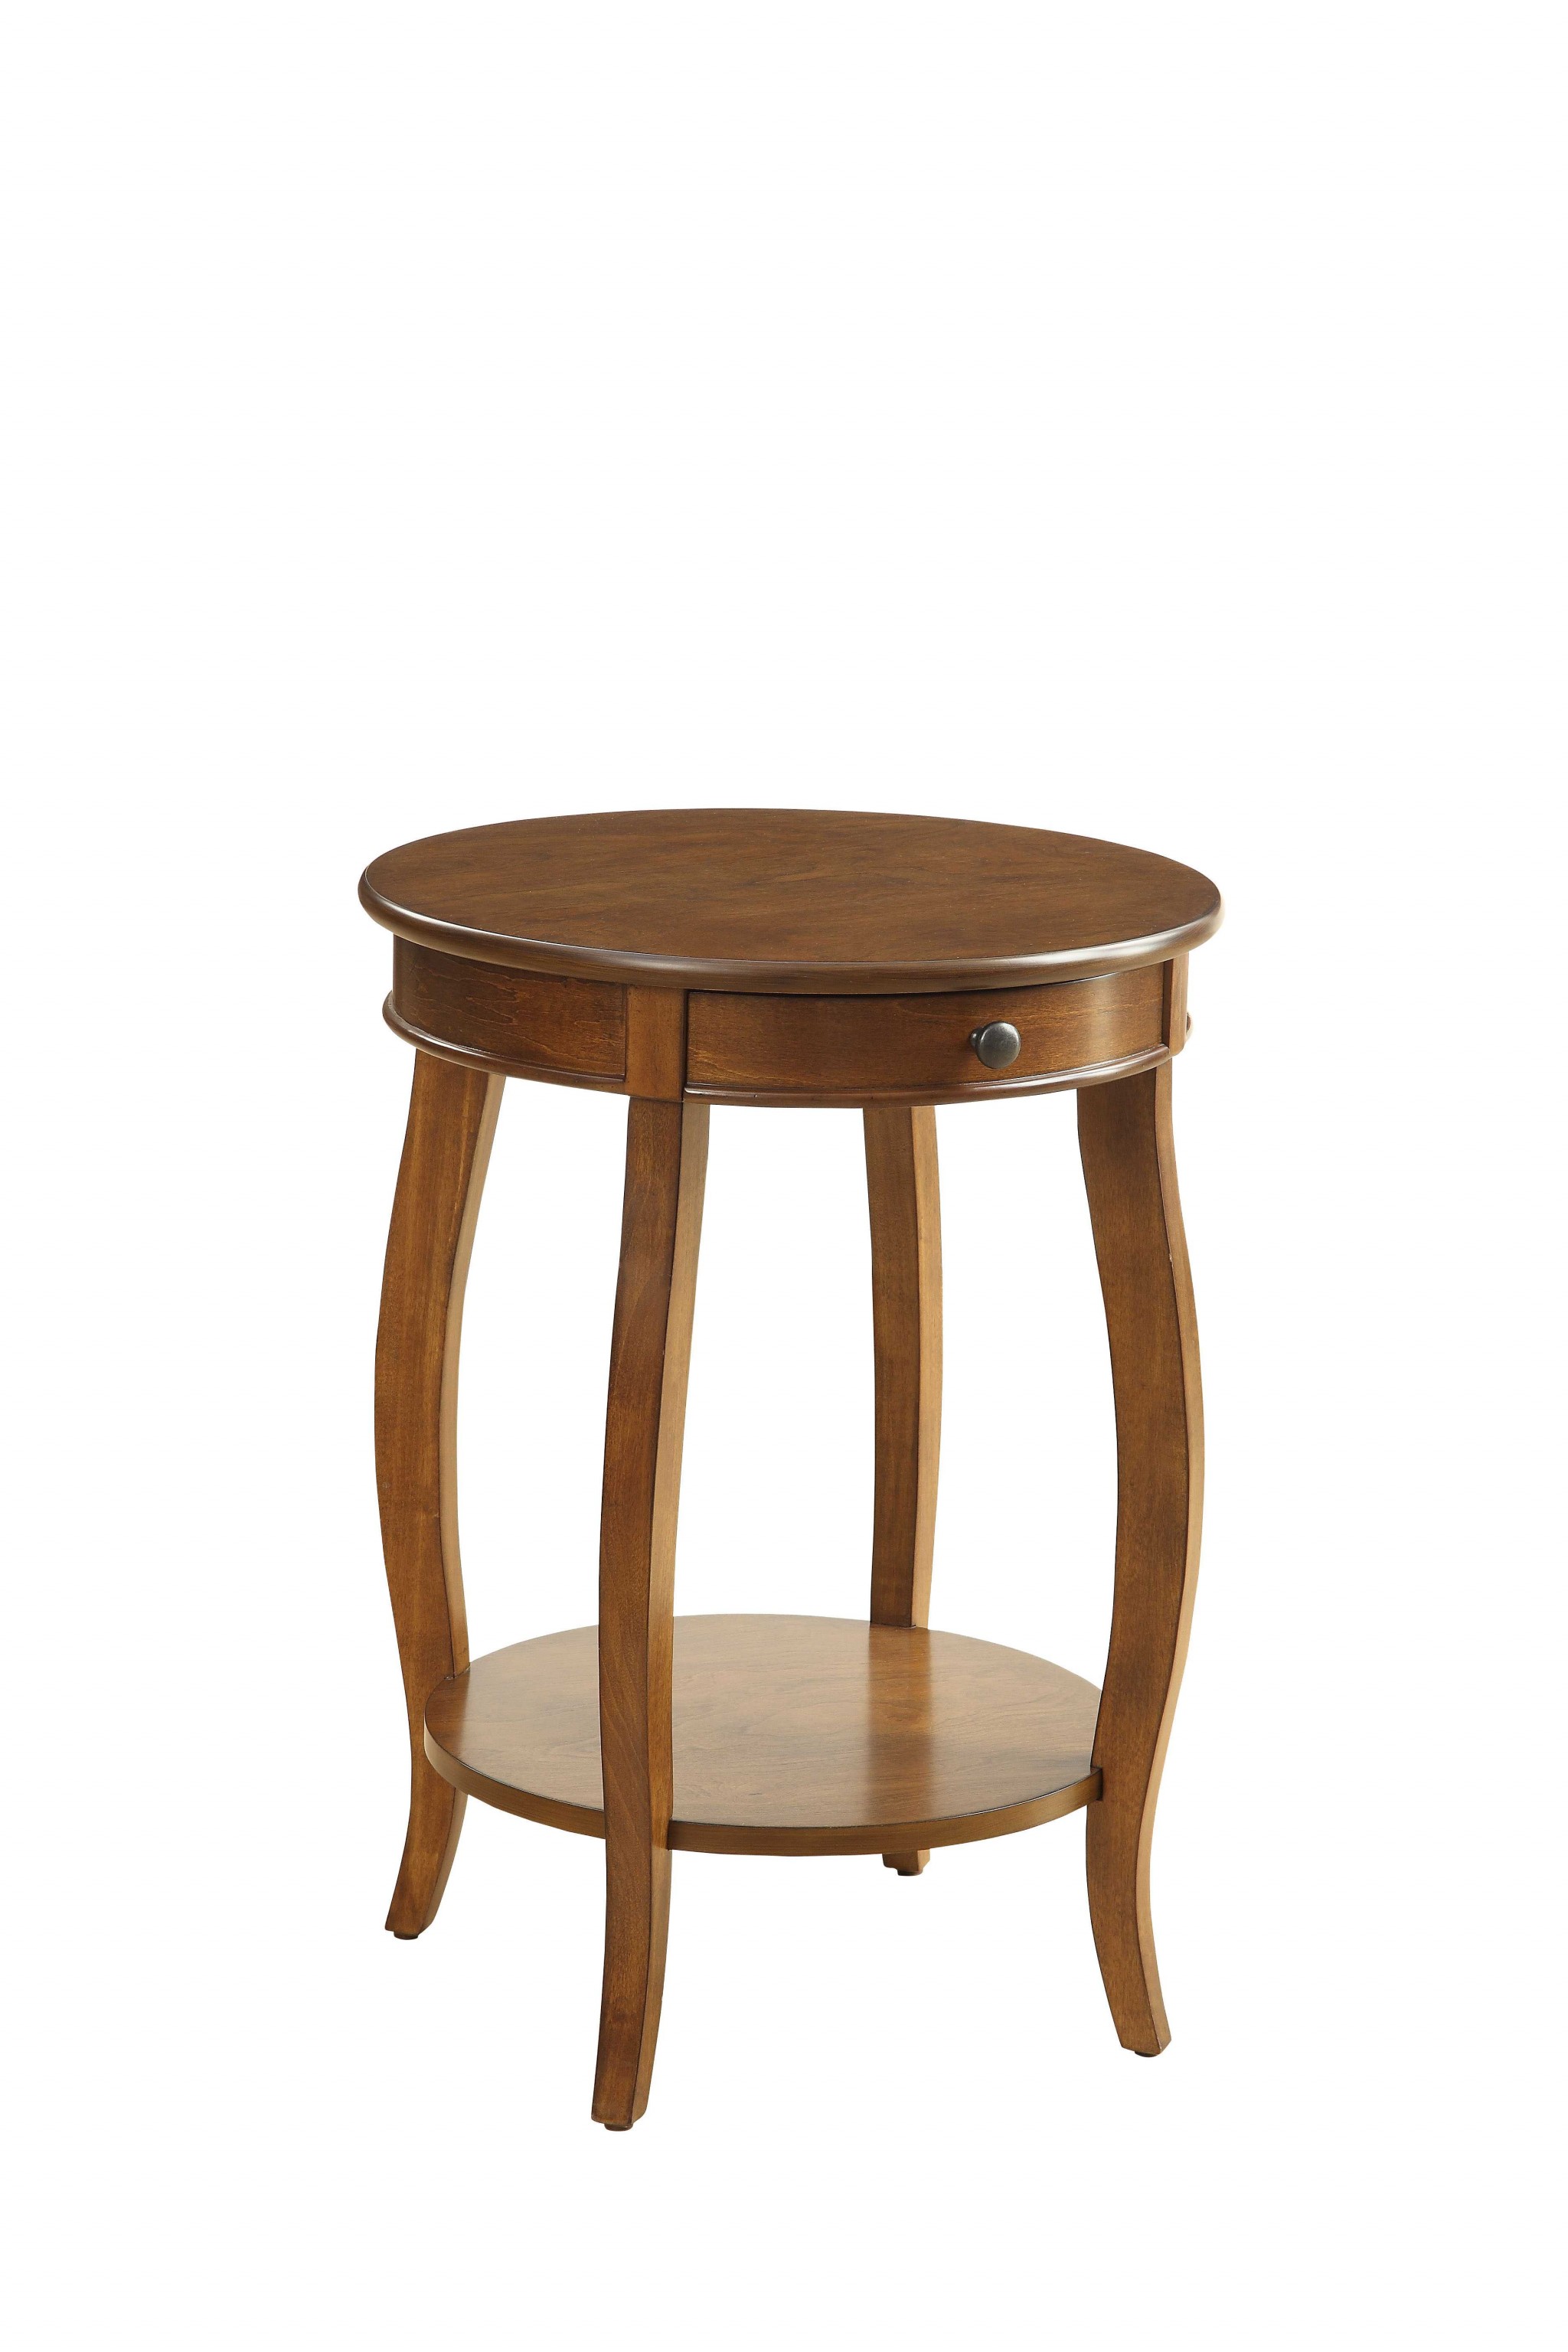 Round Walnut Wood End Table with Storage and Shelf